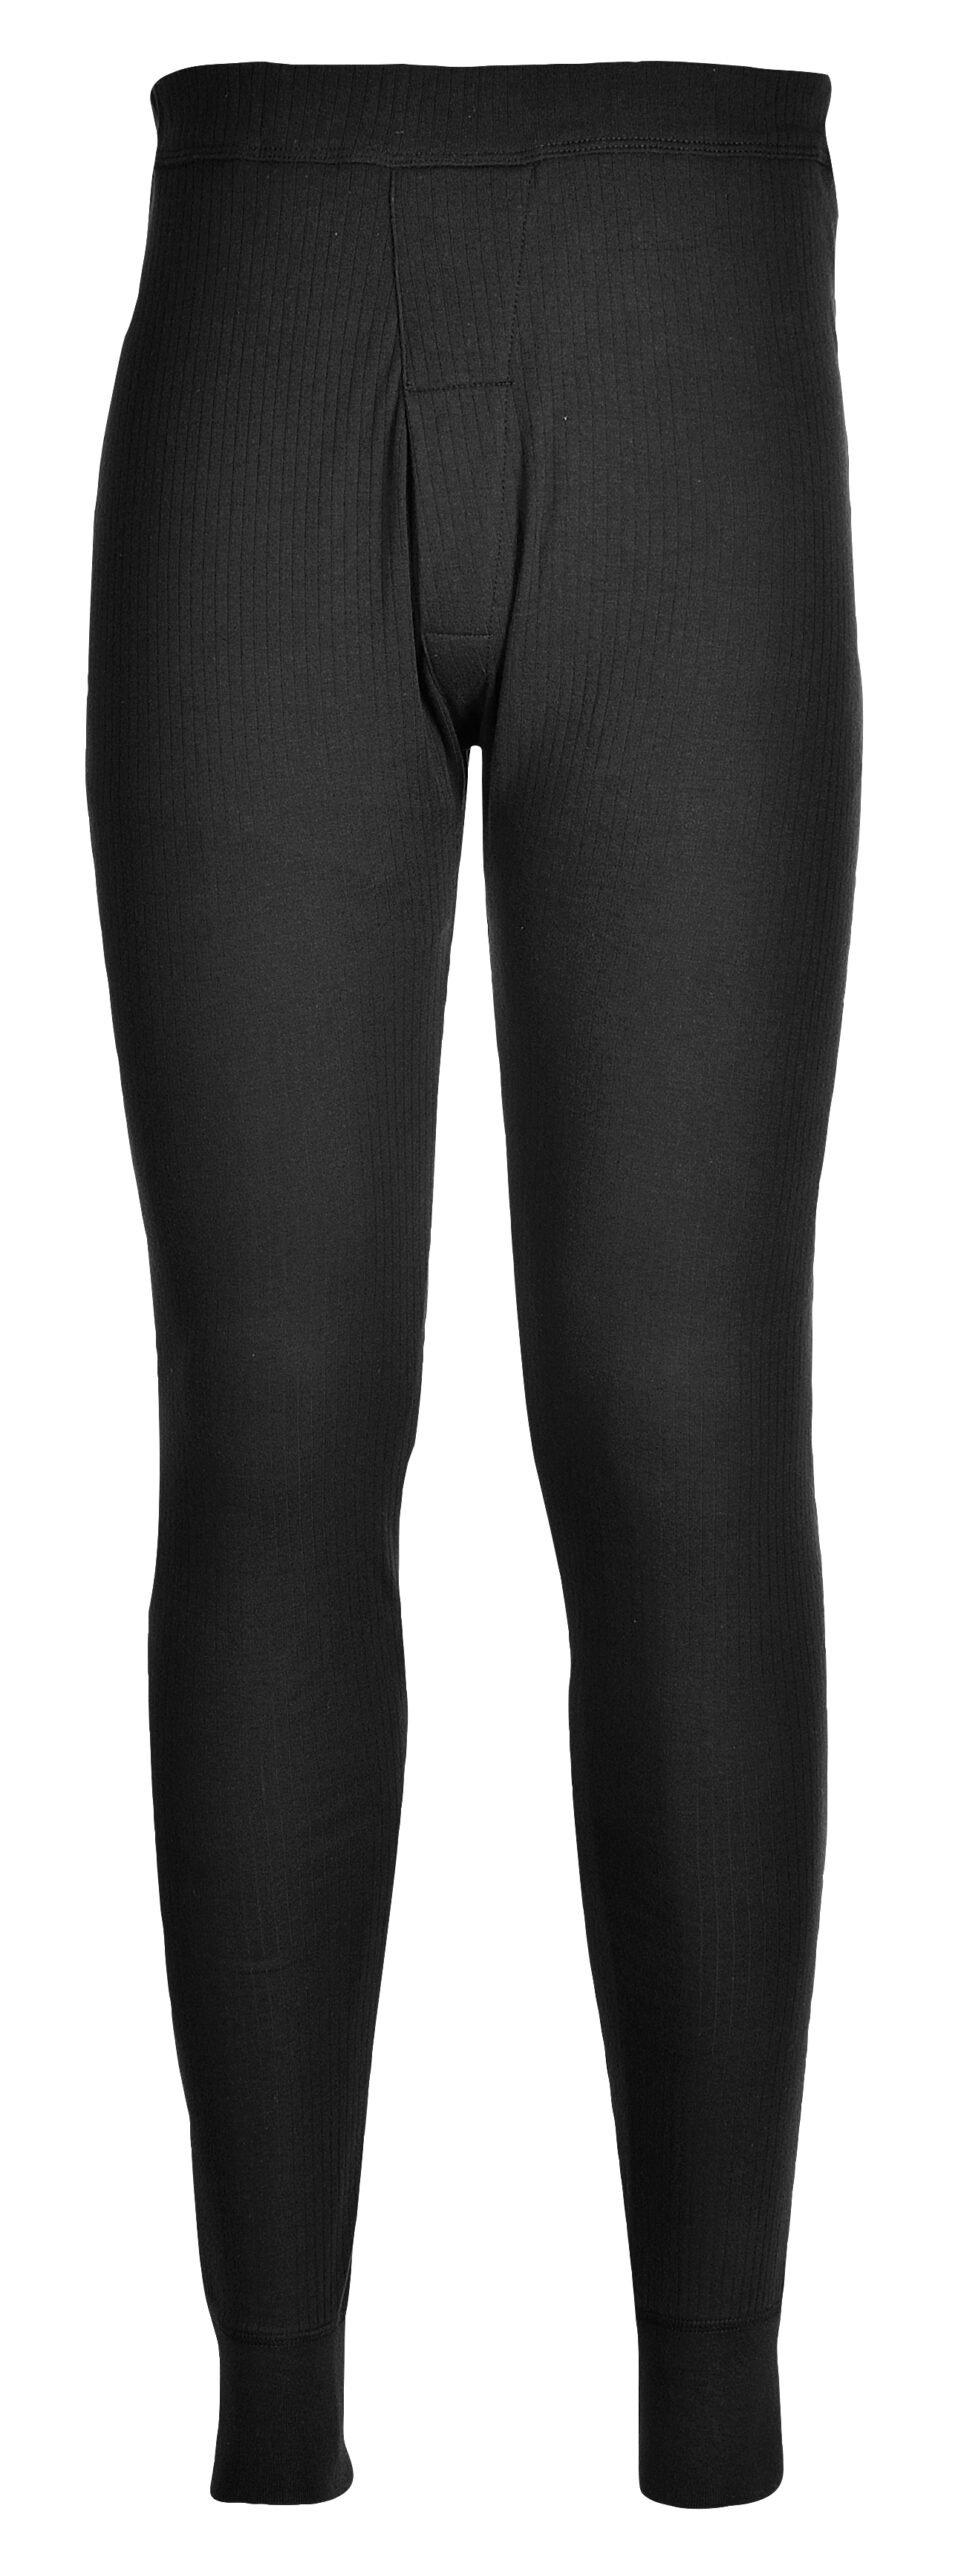 B121 Thermal Trouser | Concept Products Ltd